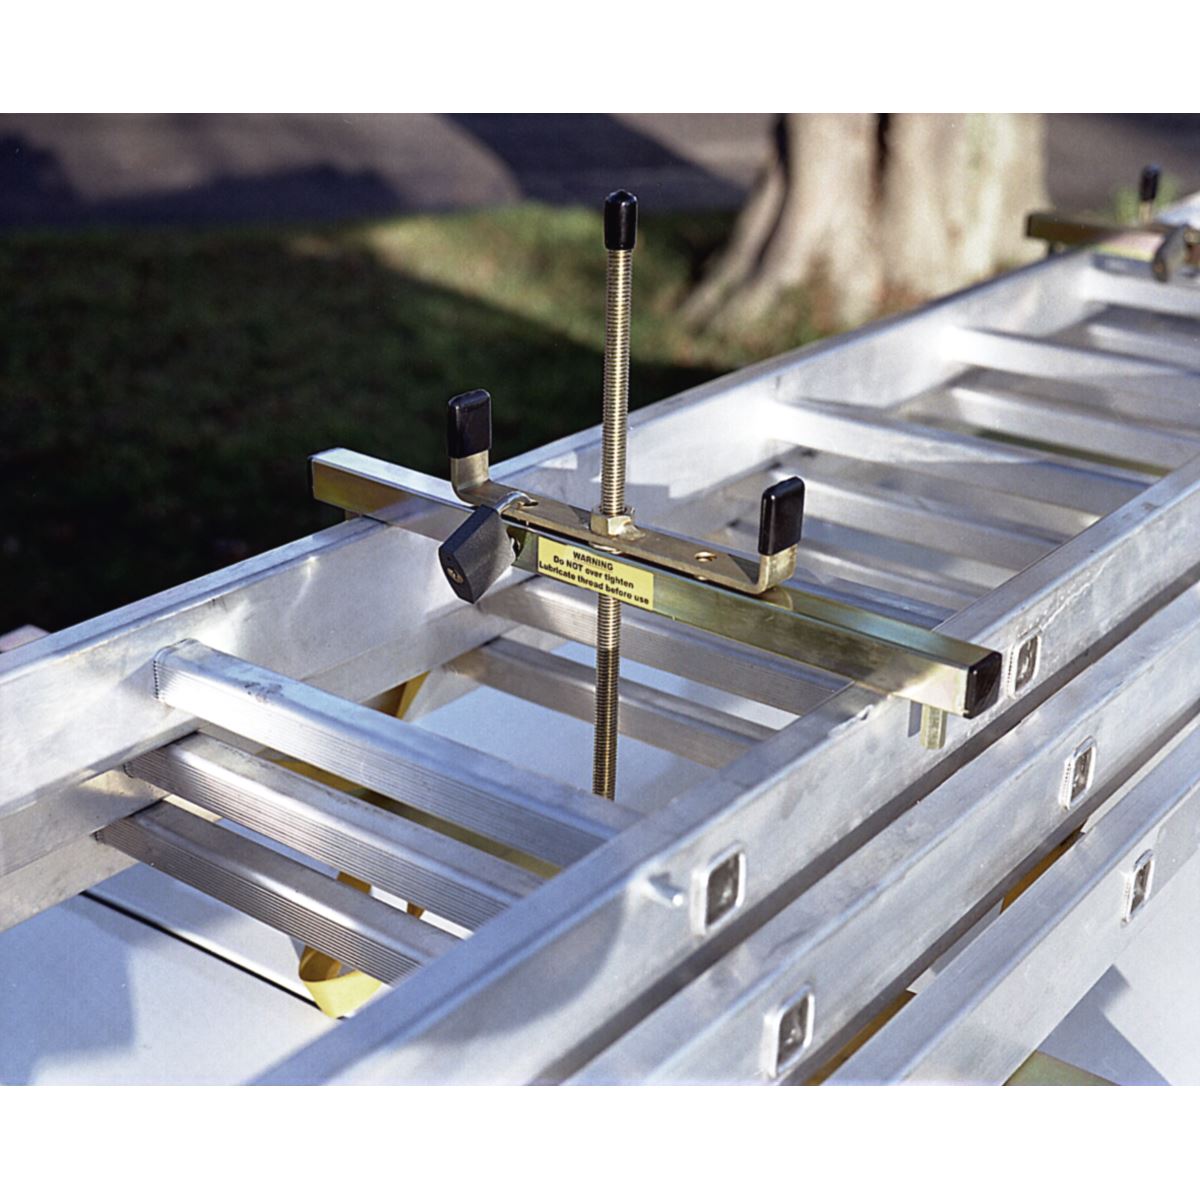 Sealey Ladder Roof Rack Clamps